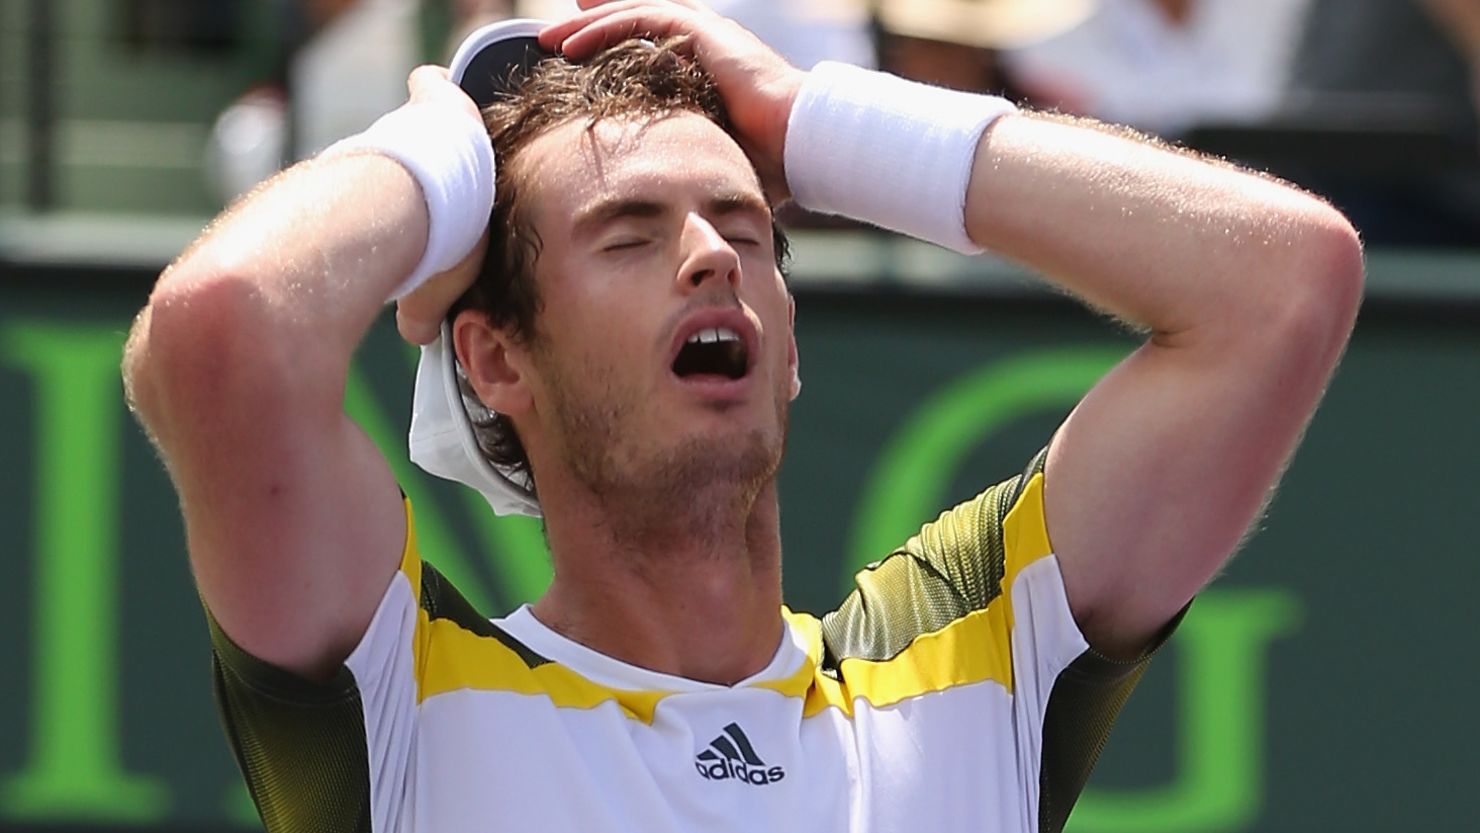 A relieved Andy Murray celebrates his victory in the Miami Masters final against Spain's David Ferrer at Crandon Park.